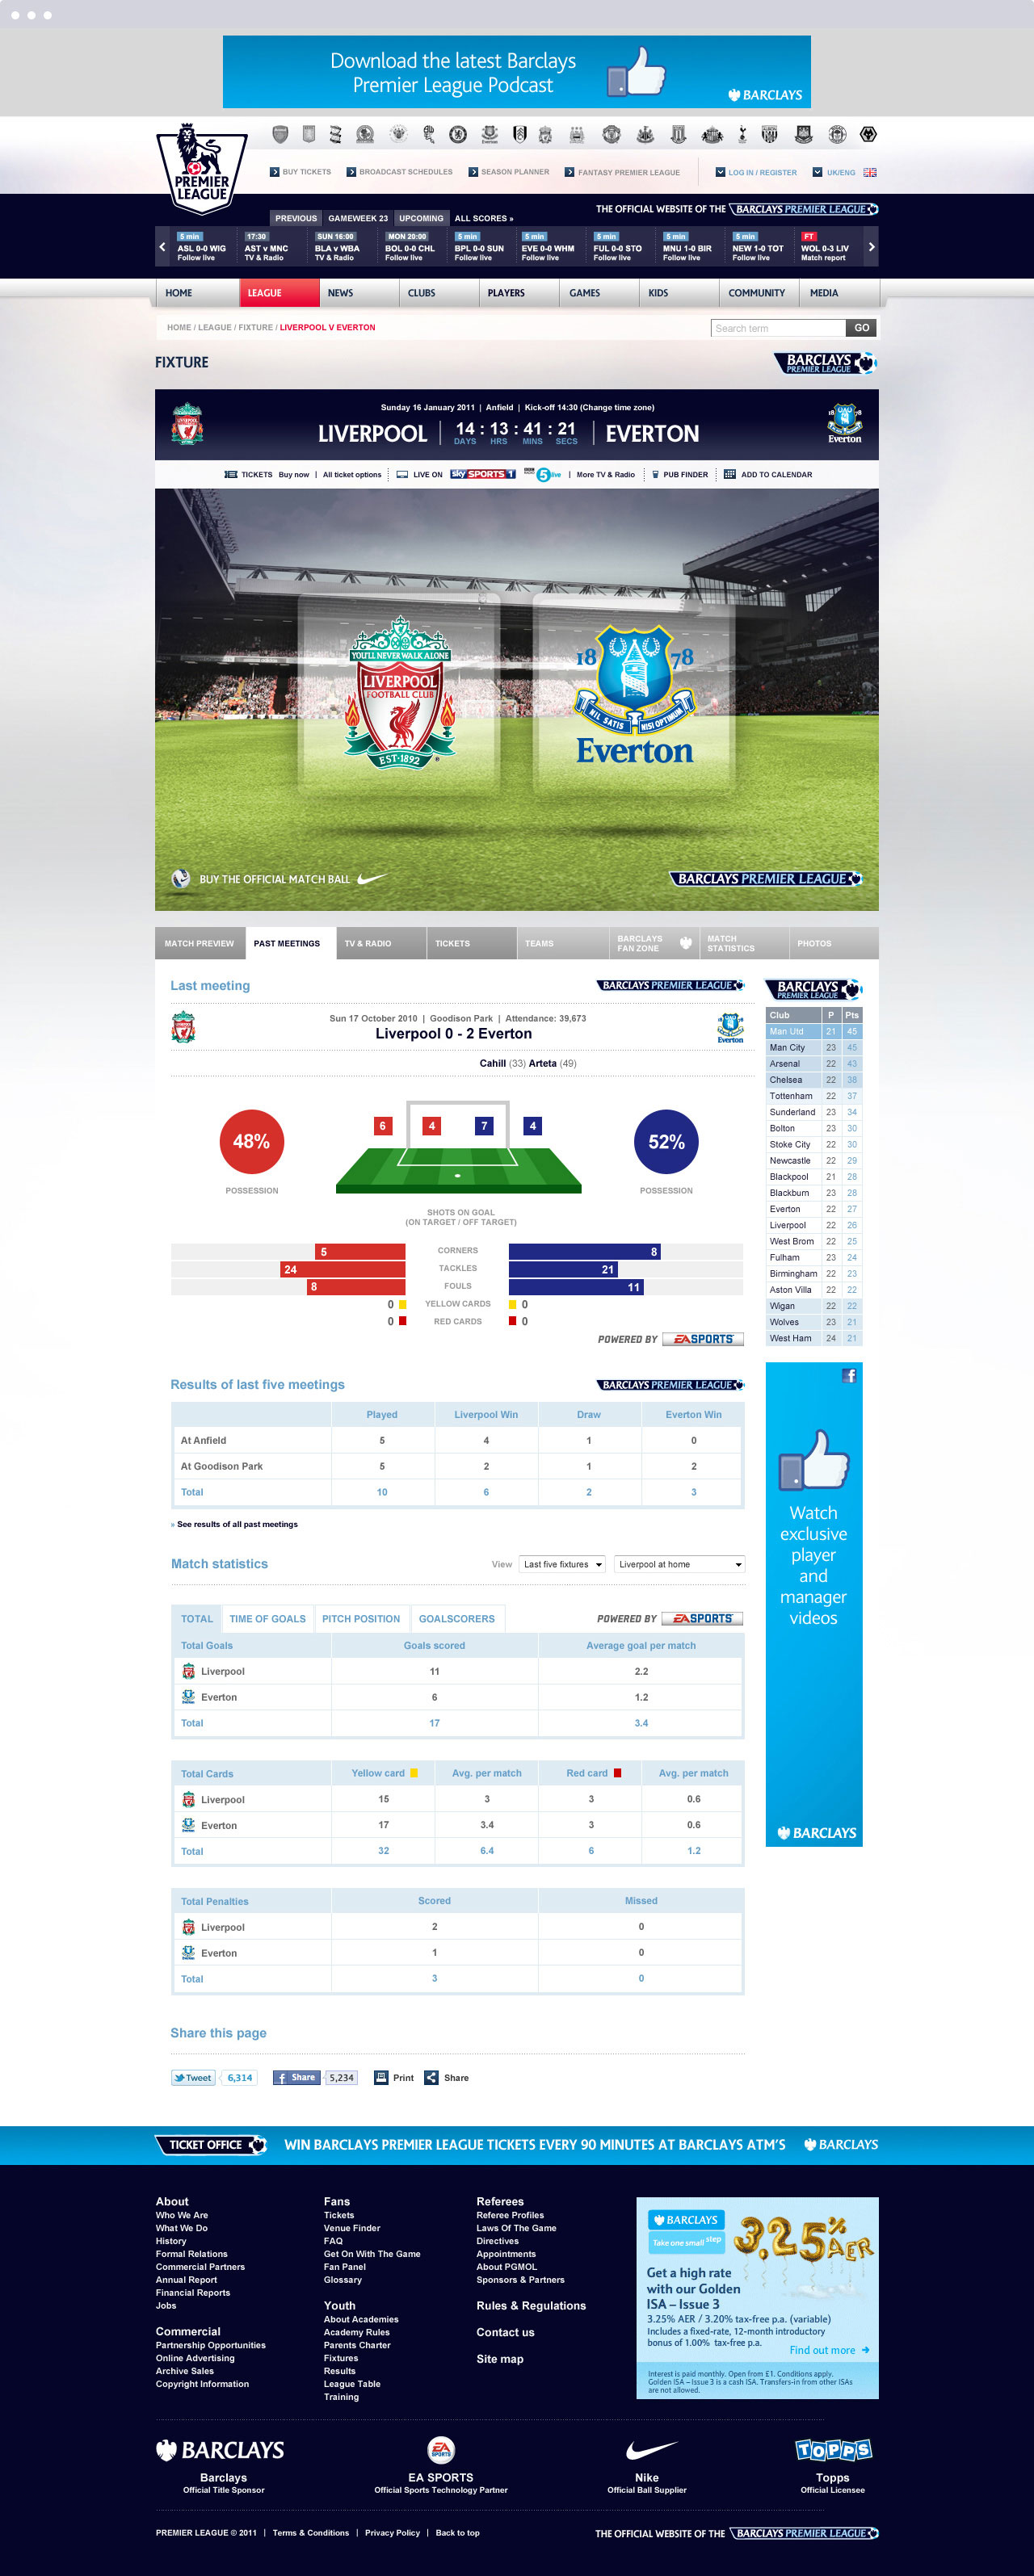 Website showing pre-match information and head-to-head statistics for a match.